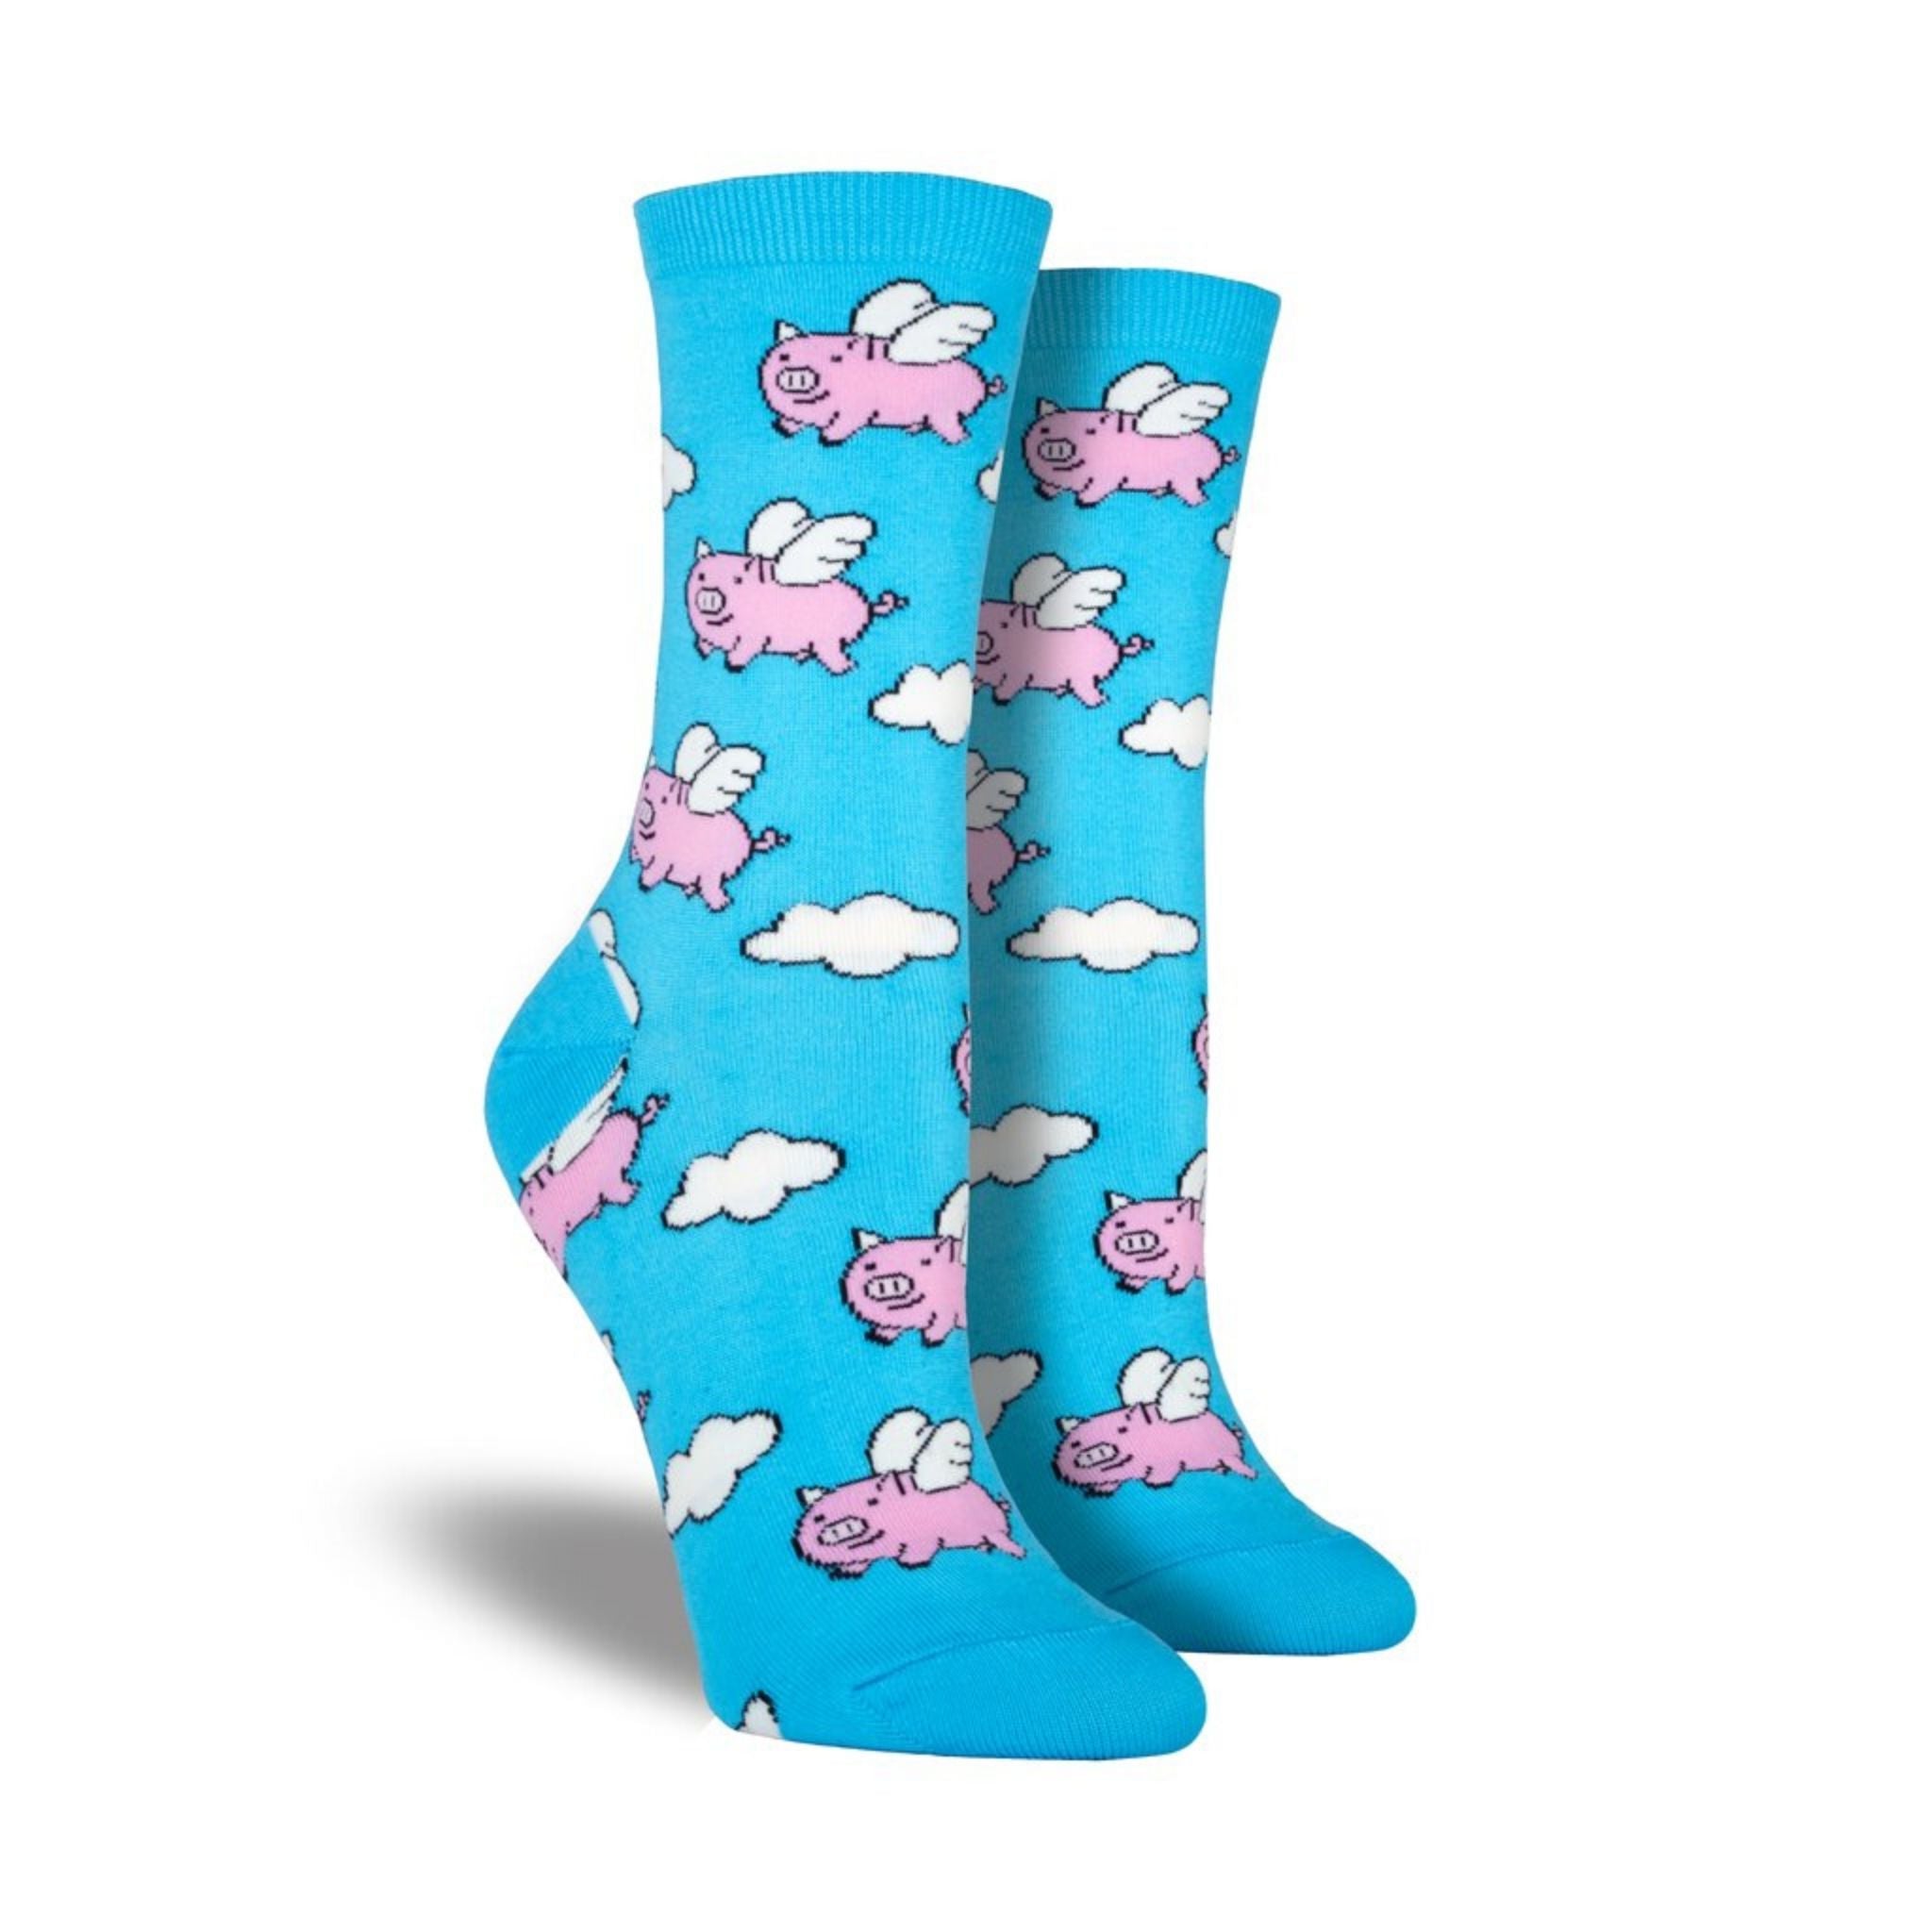 Women's Blue crew socks with pigs flying on them